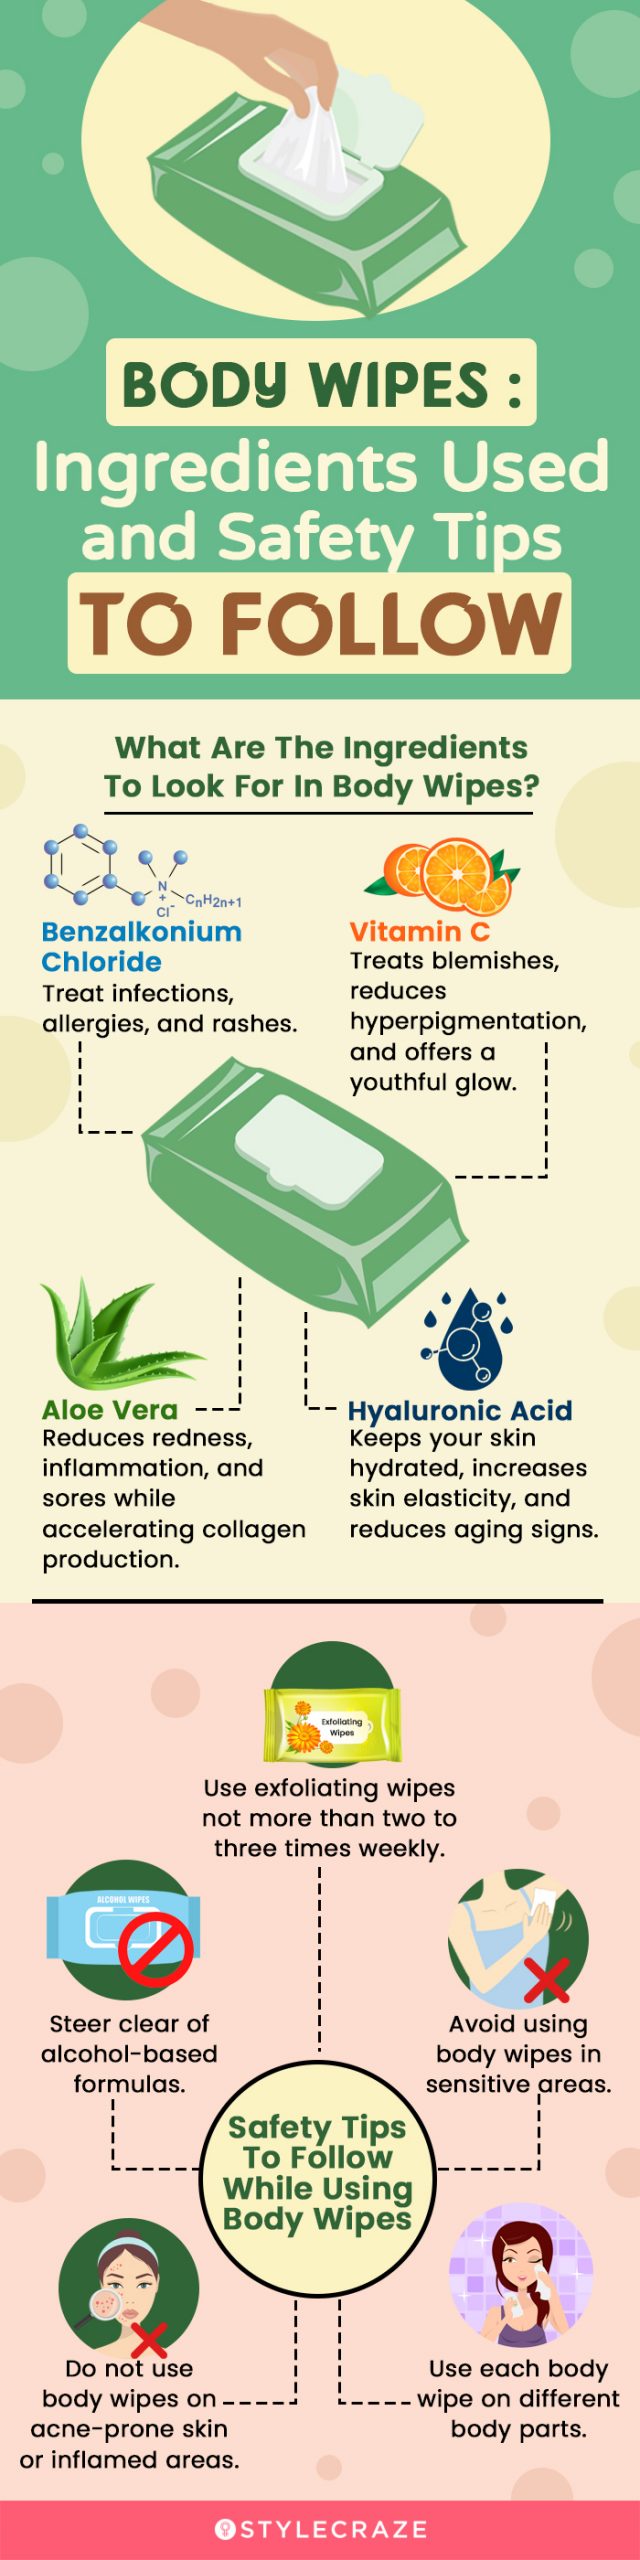 Body Wipes Ingredients Used & Safety Tips To Follow(infographic)